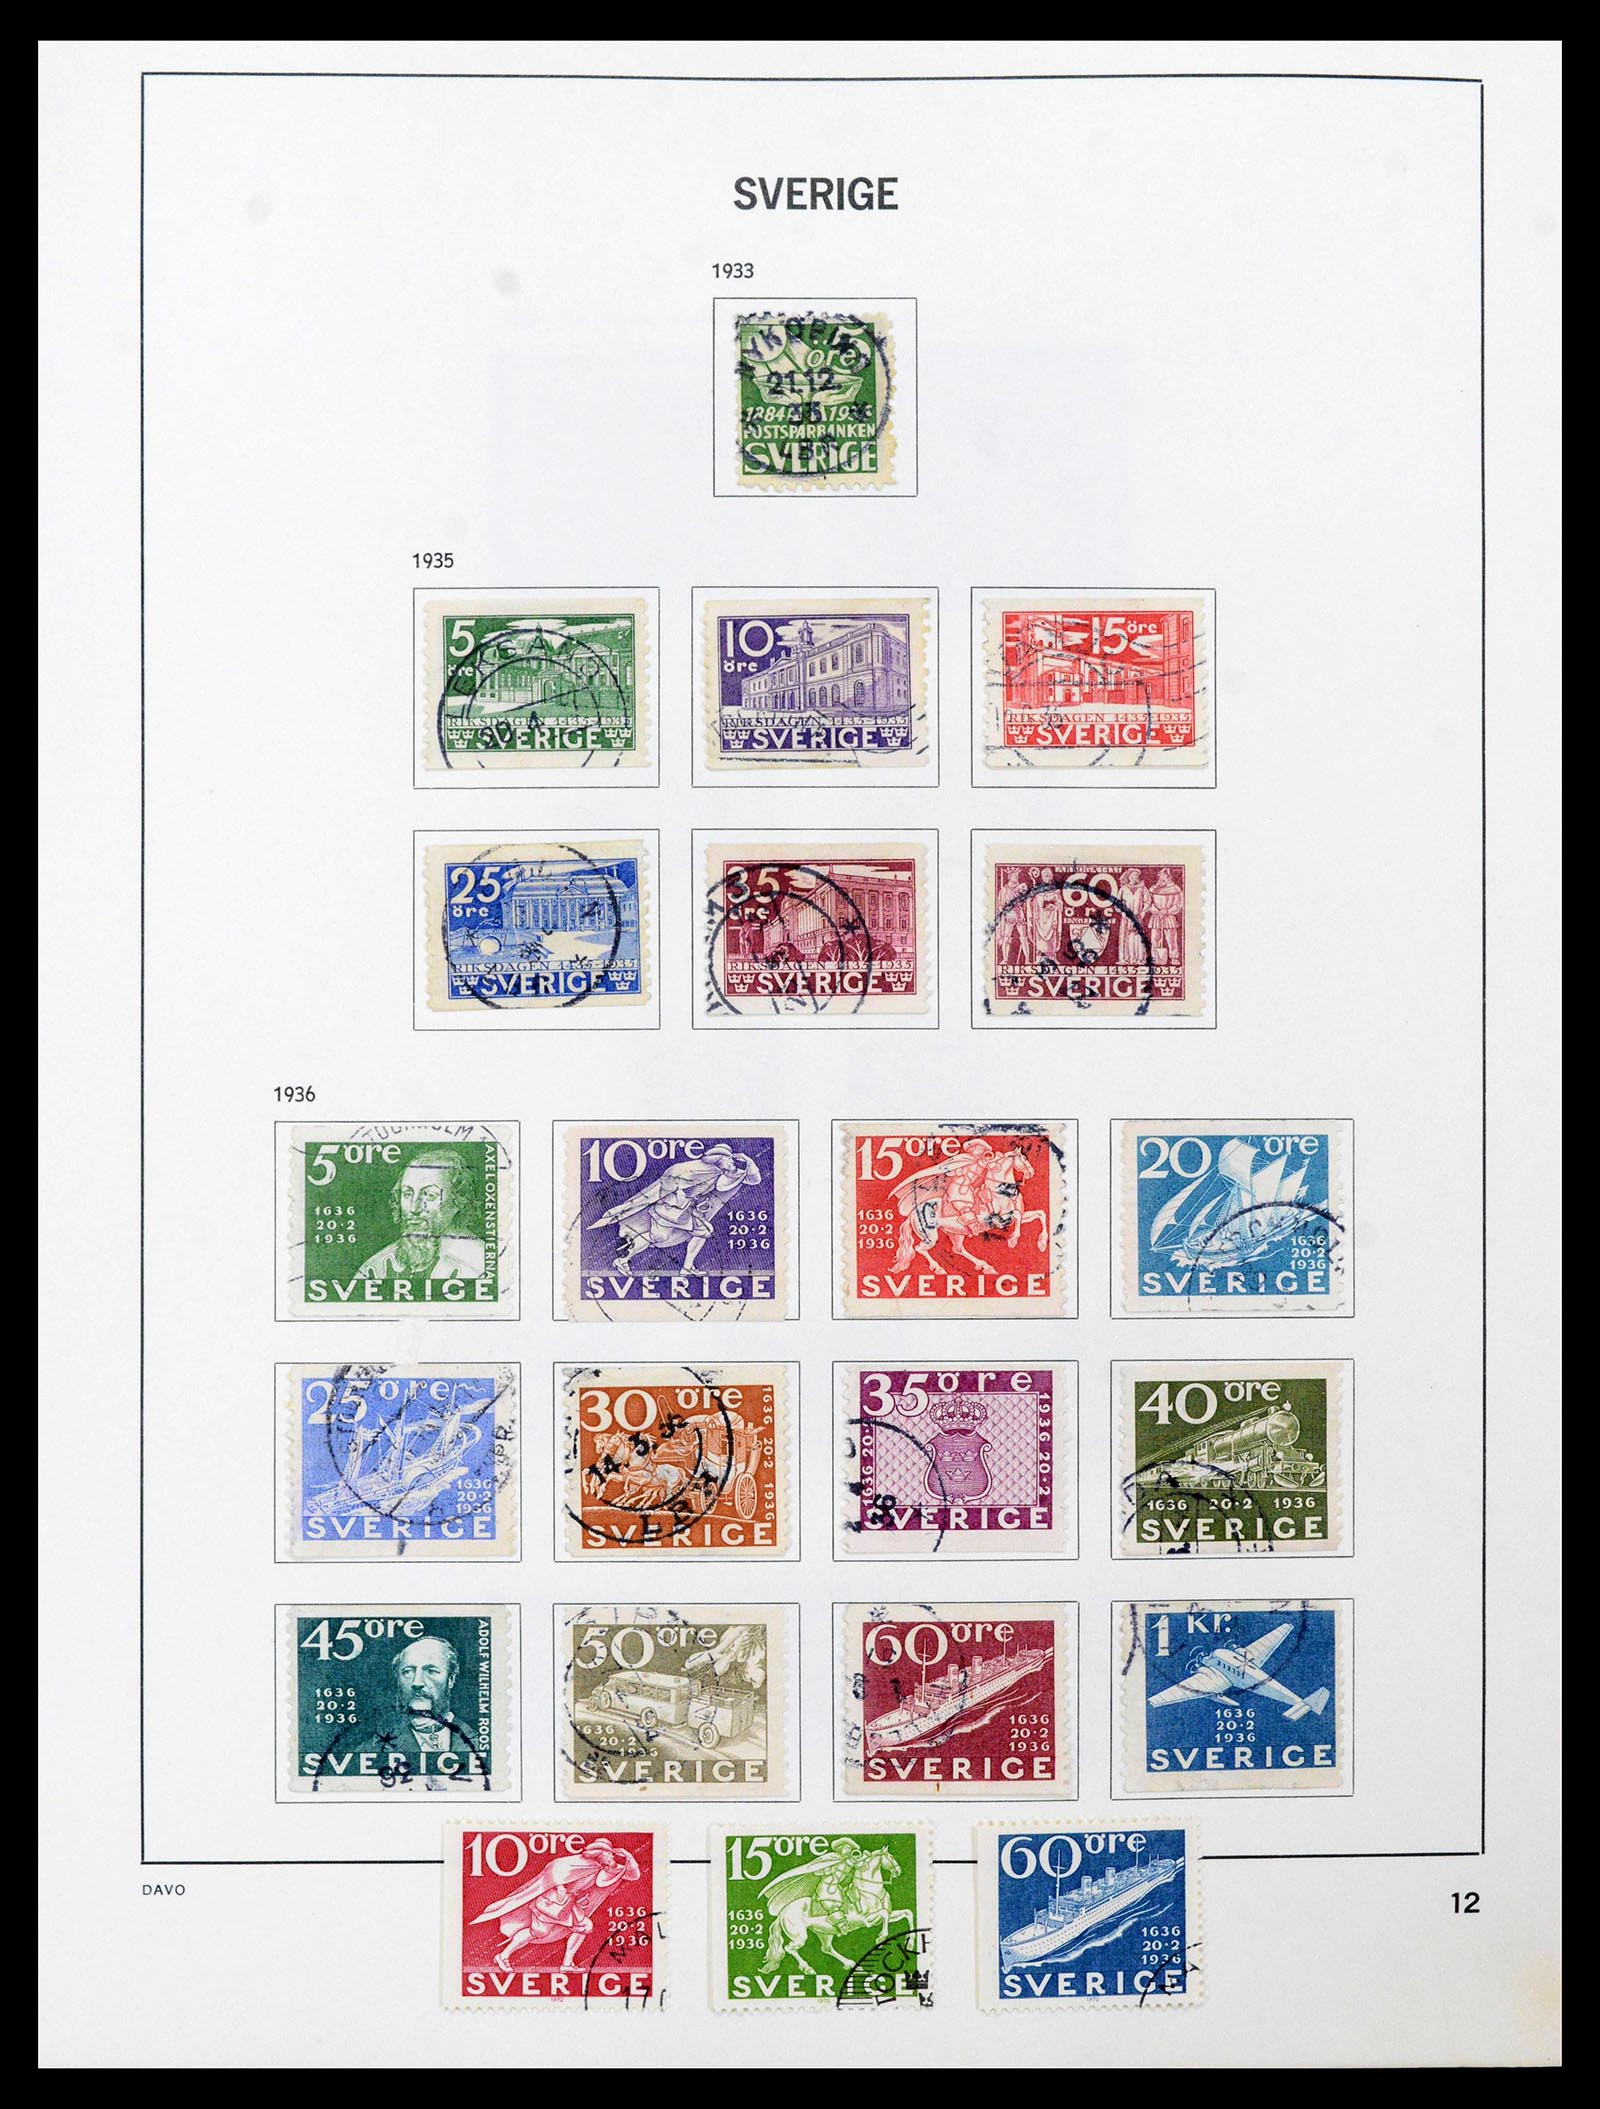 39331 0013 - Stamp collection 39331 Sweden 1855-2005.